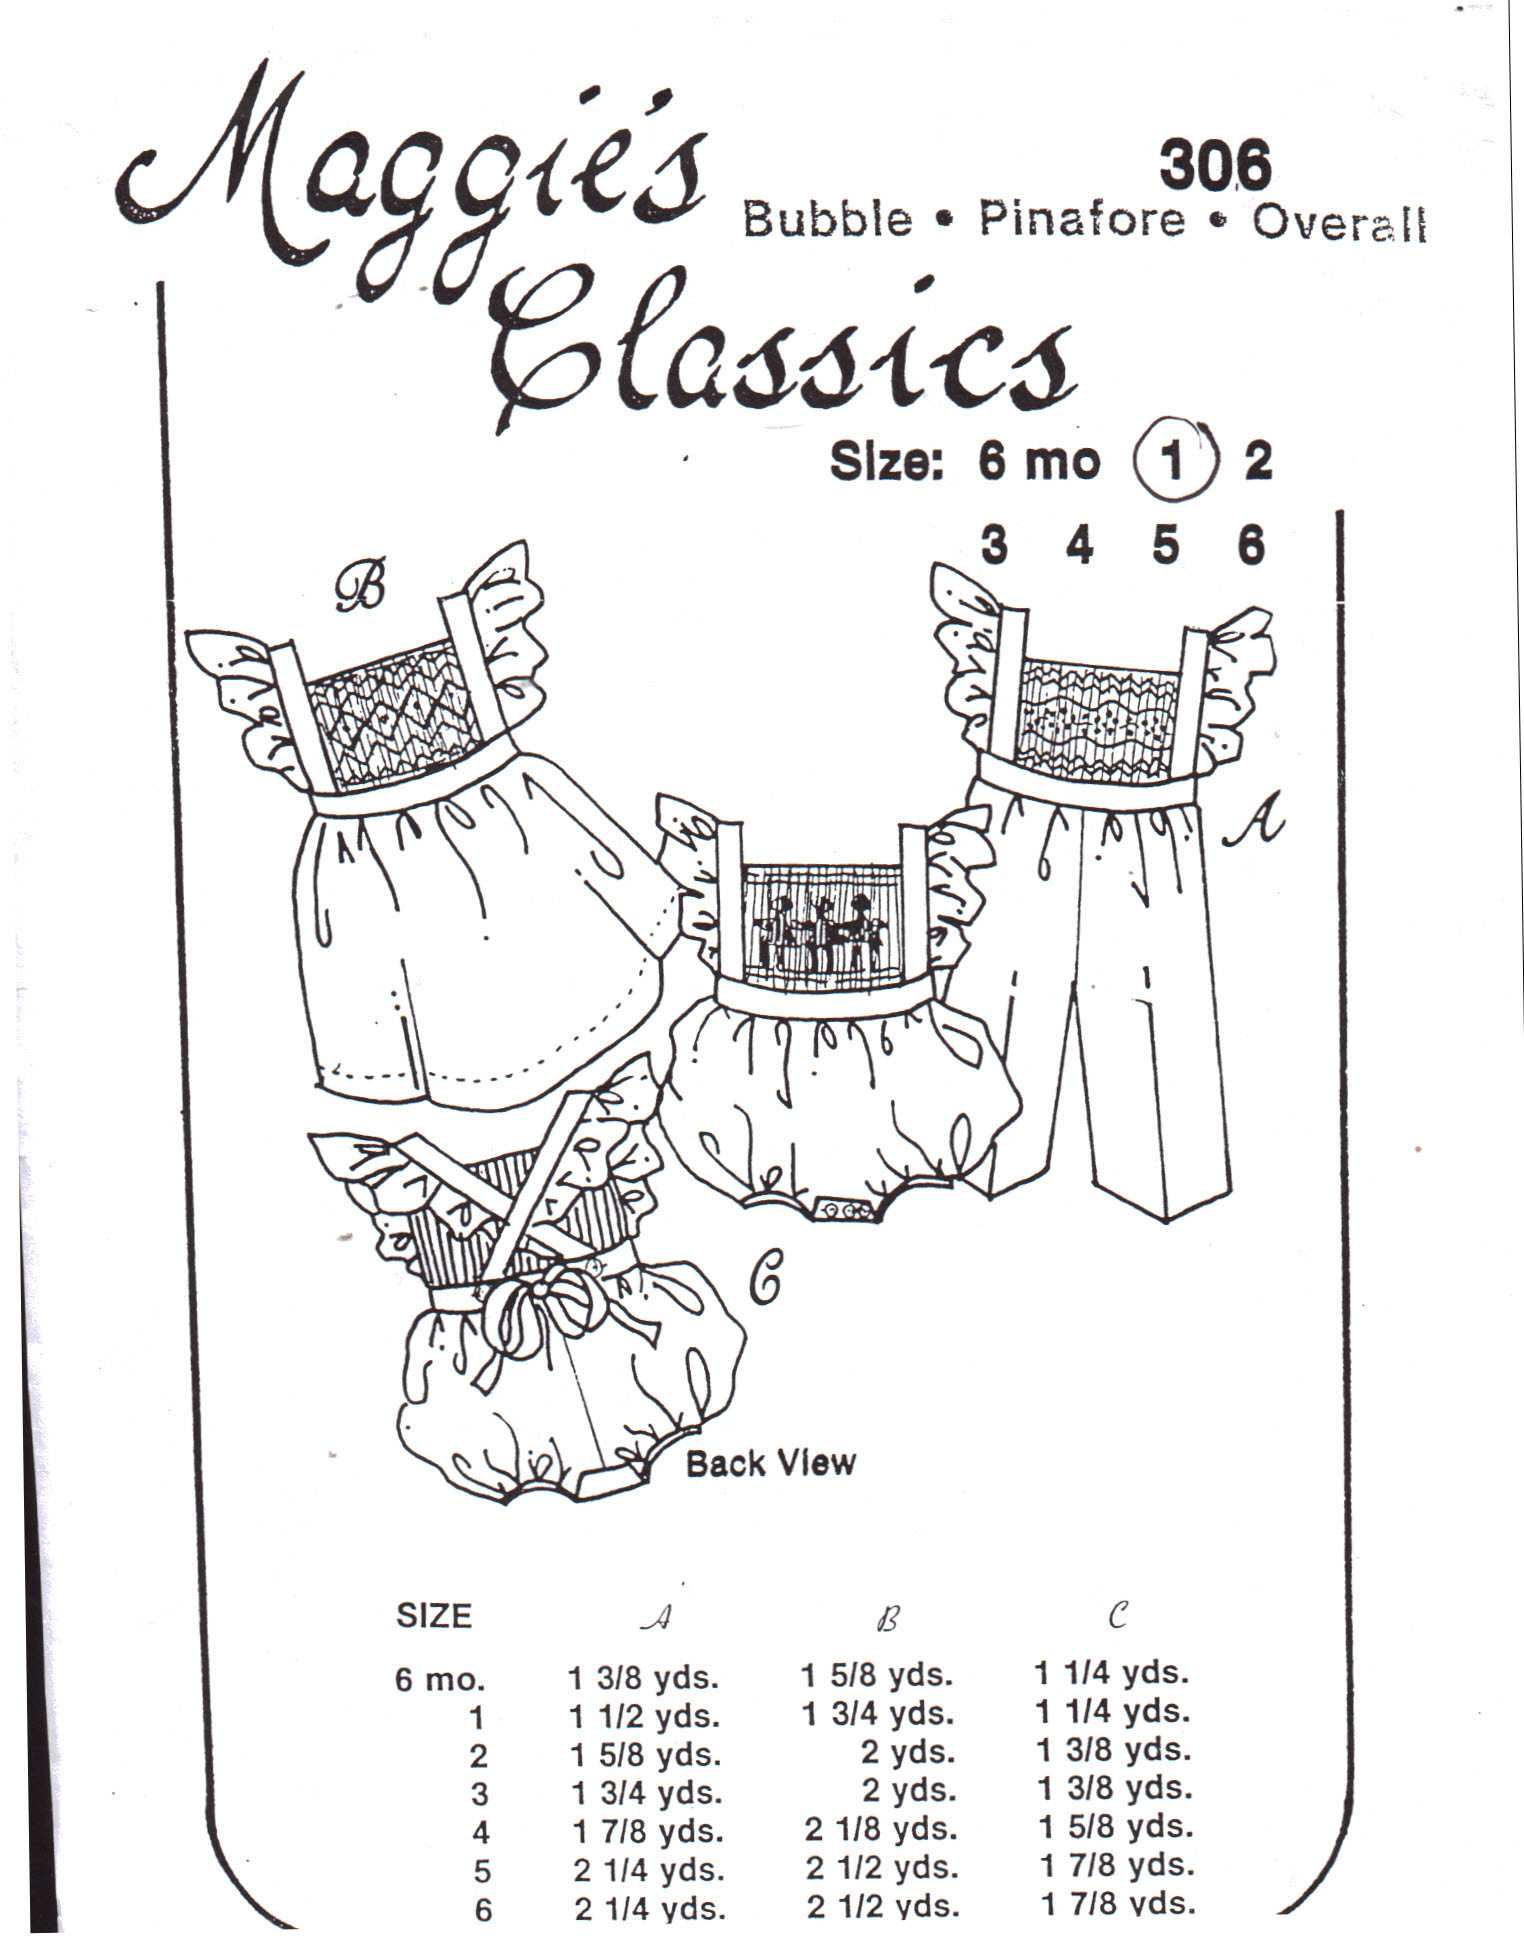 Maggie's Classics 306 Bubble, Pinafore, Overall Size: 1 Uncut Sewing ...